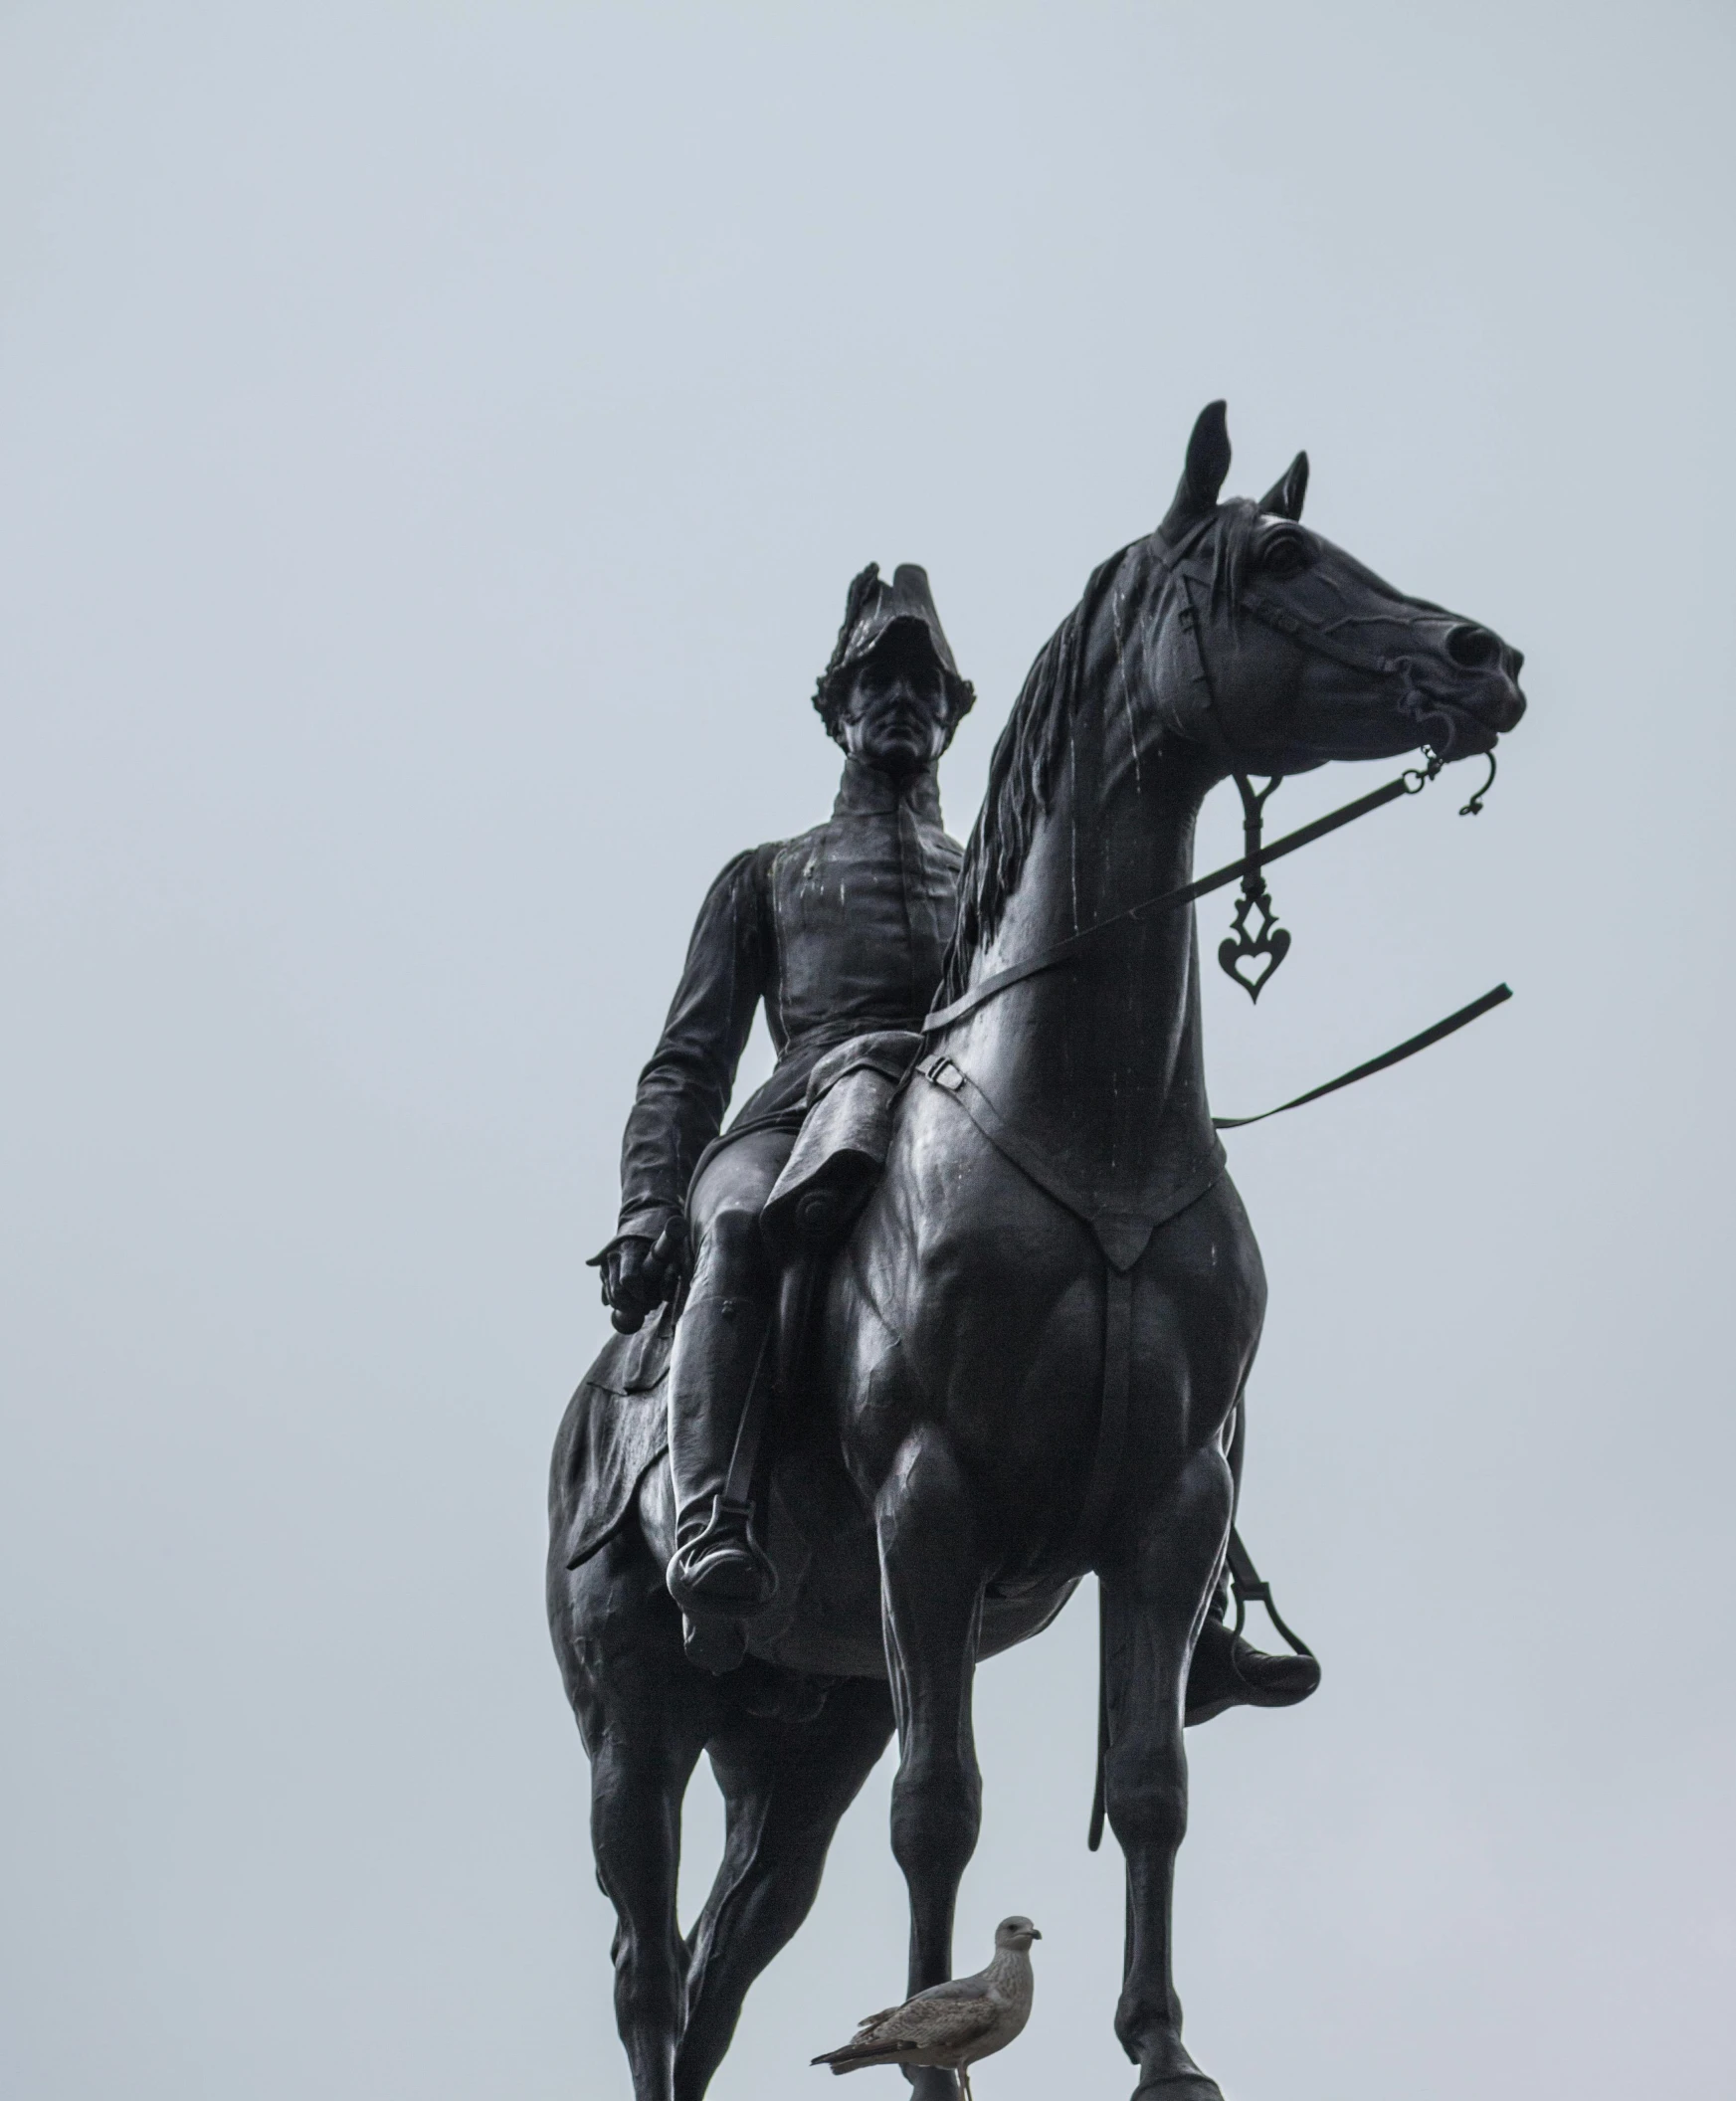 a statue of a man riding on the back of a horse, inspired by Prince Hoare, unsplash, wearing a general\'s uniform, square, grey skies, black man